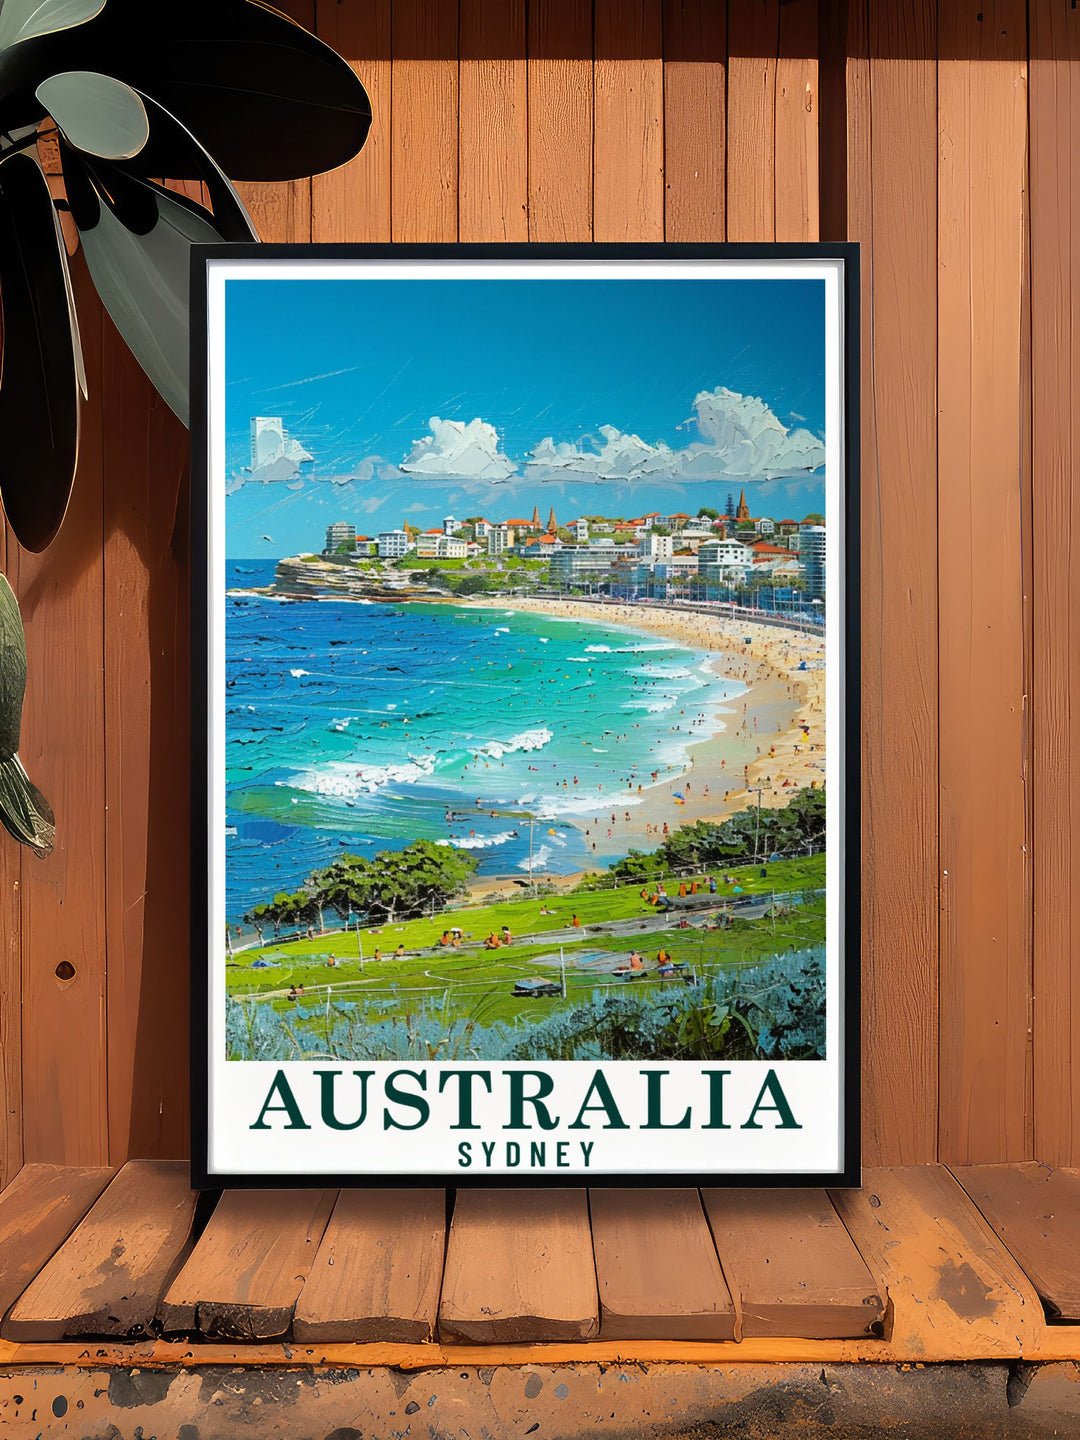 The excitement of Bondi Beach is depicted in this vibrant travel poster, featuring its world famous surf and lively coastal walk. A must have for any beach lovers home decor.